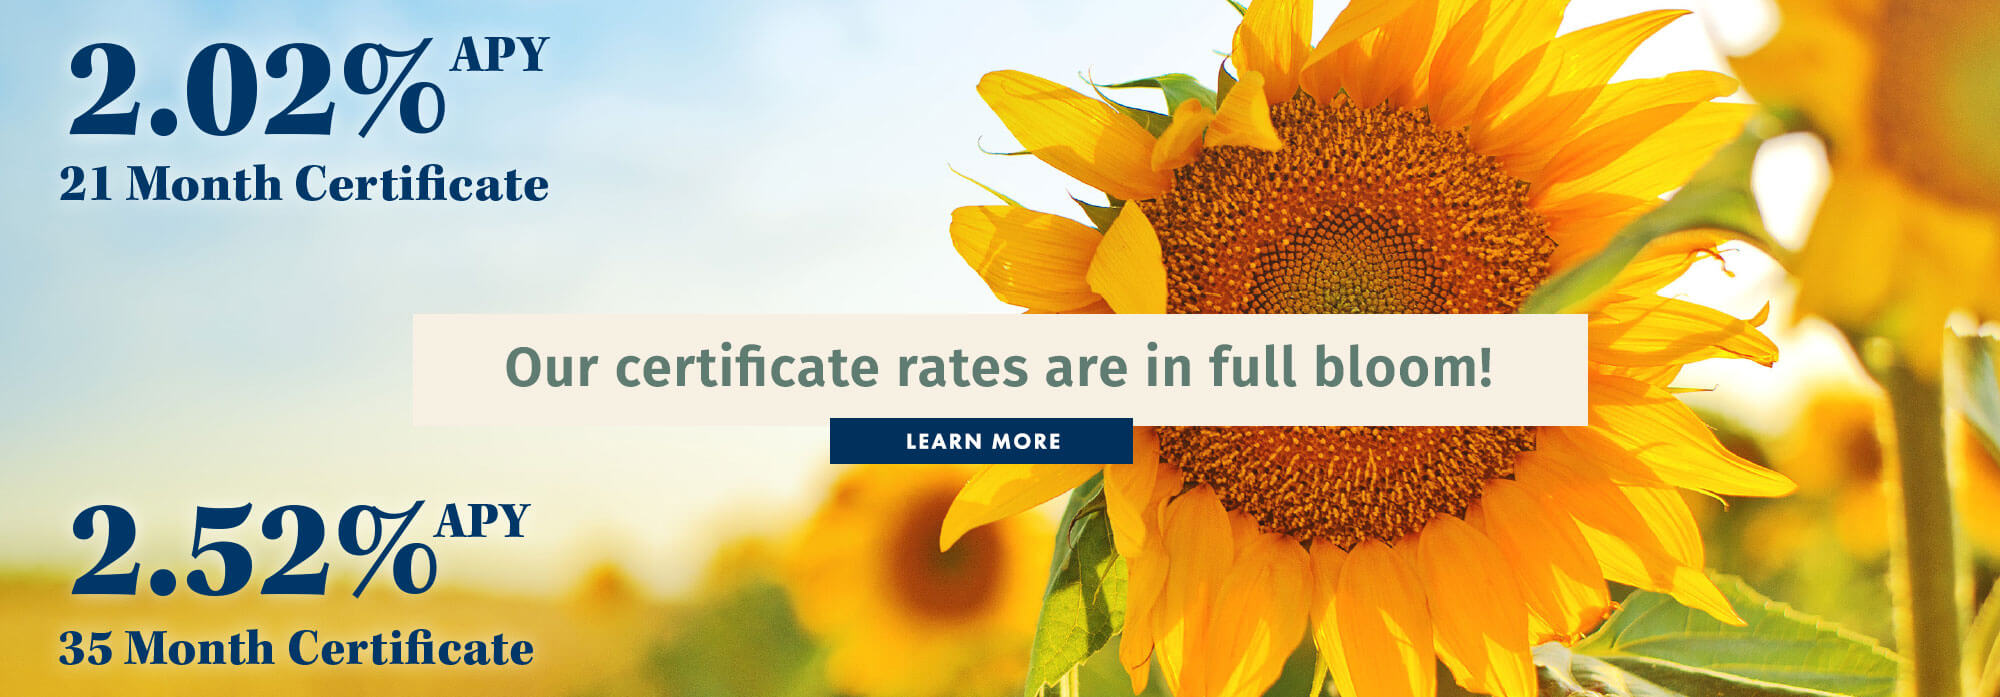 Our certificate rates are in full bloom!